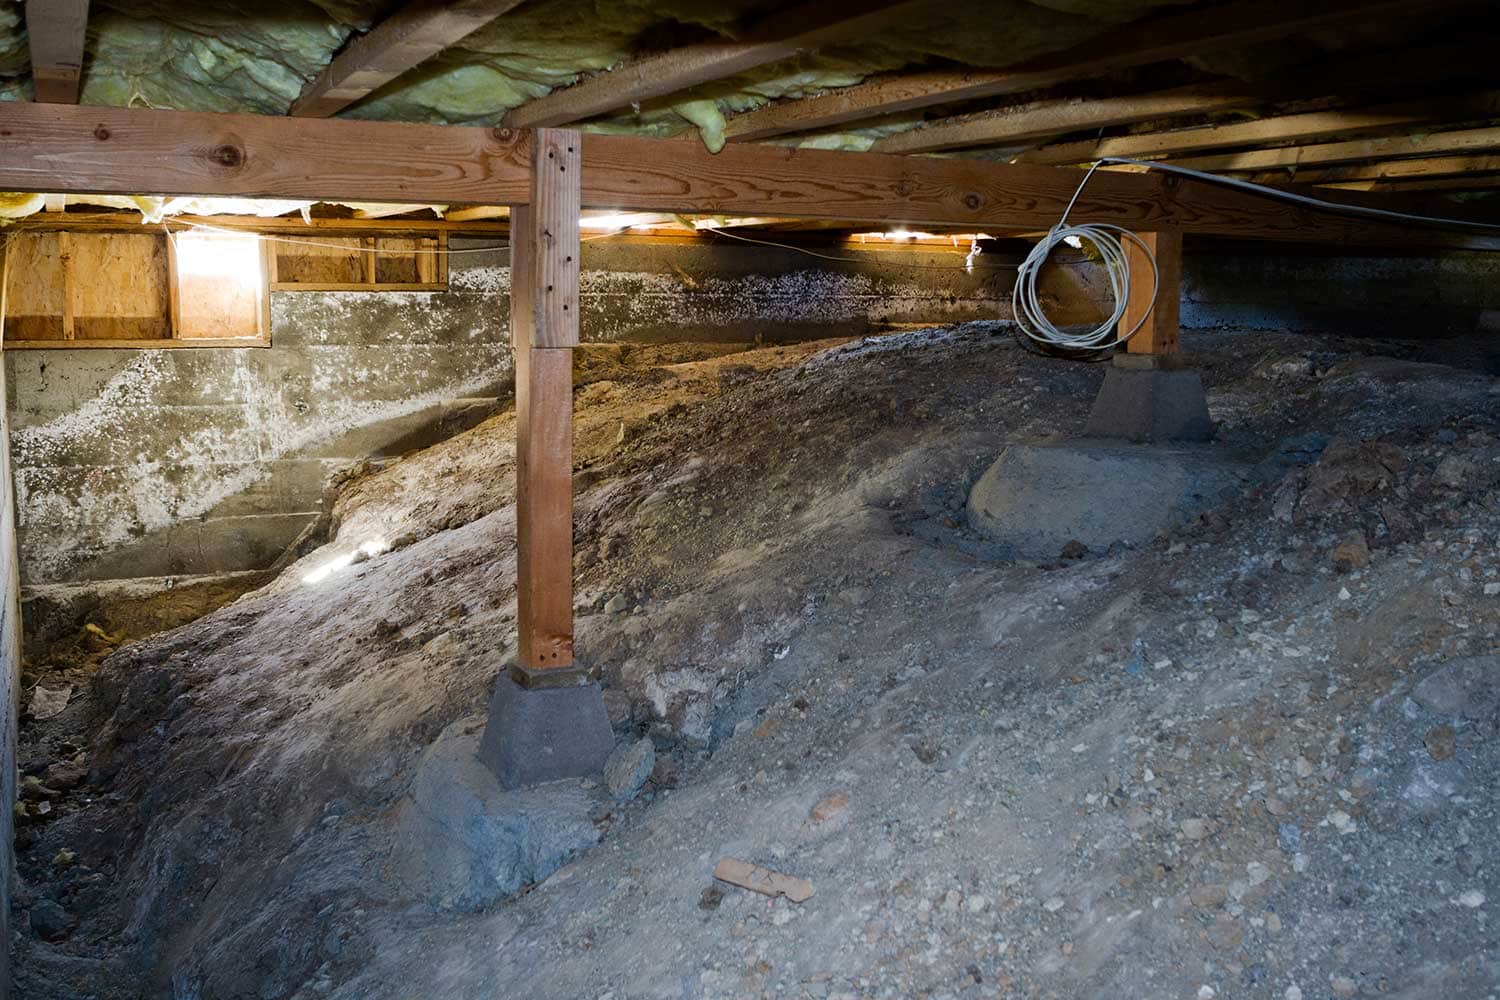 Crawl space under typical American house